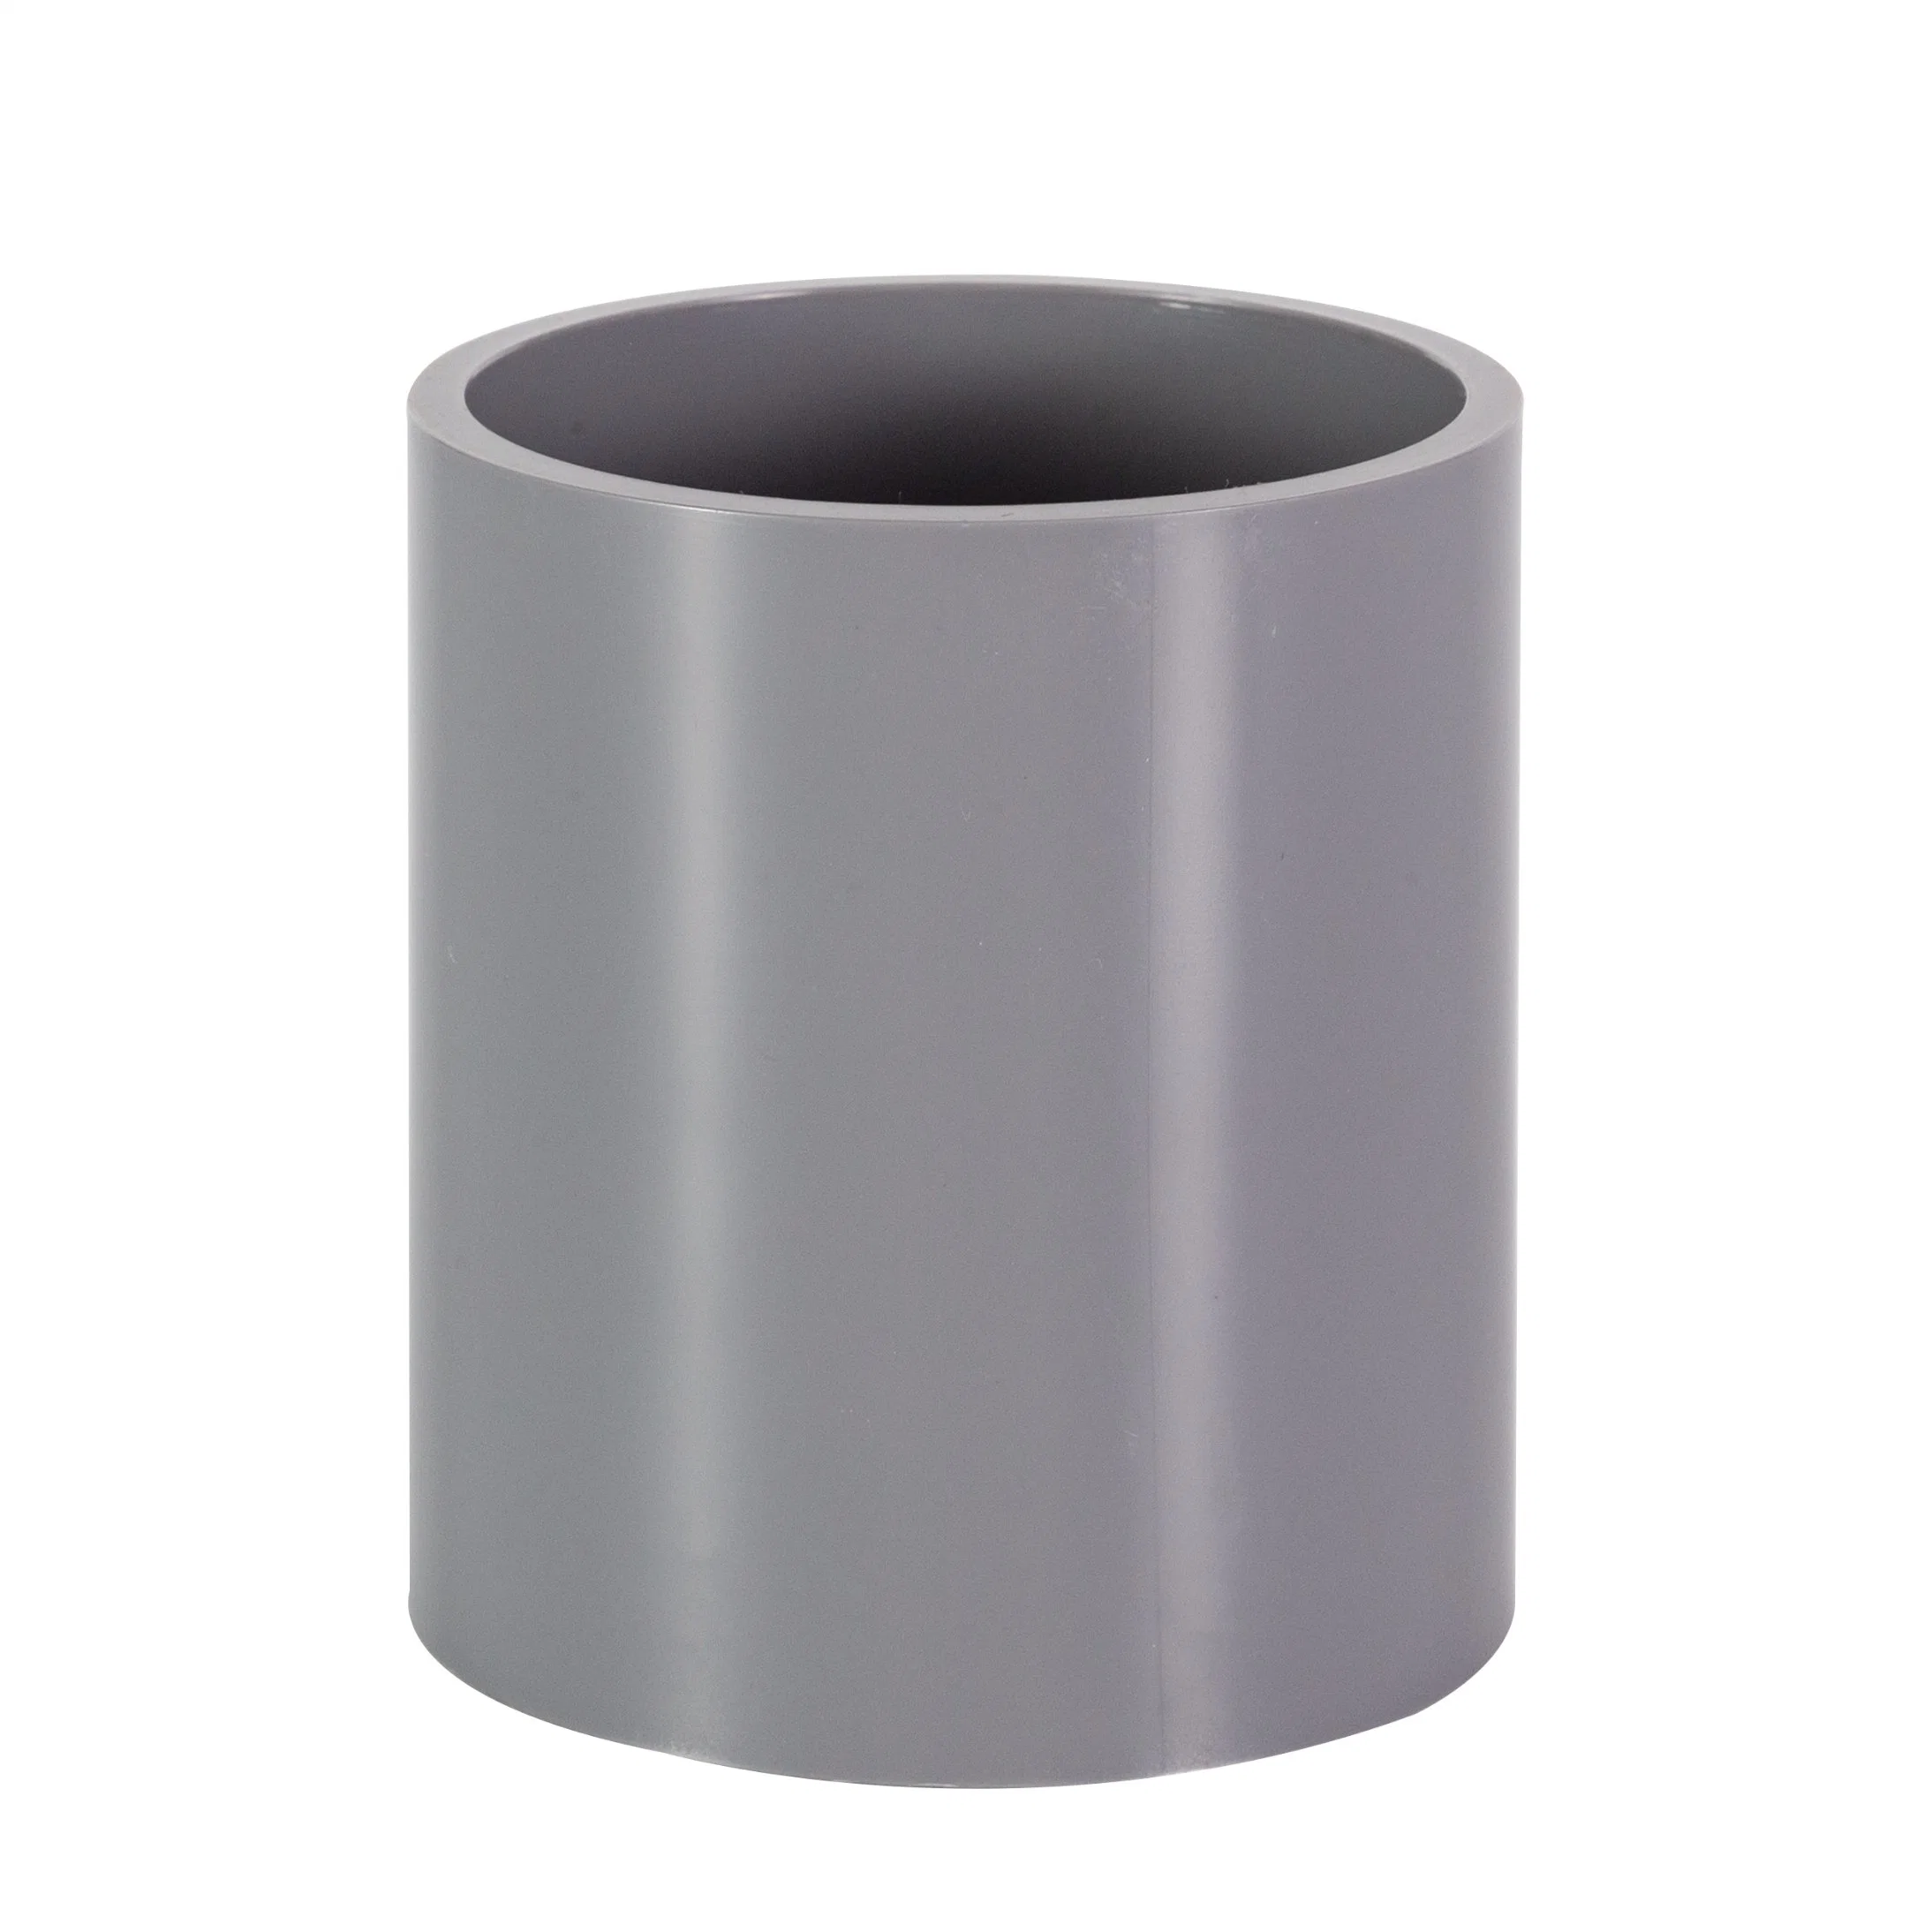 High quality/High cost performance PVC Pipe Fittings-Pn10 Standard Plastic Pipe Fitting Socket for Water Supply